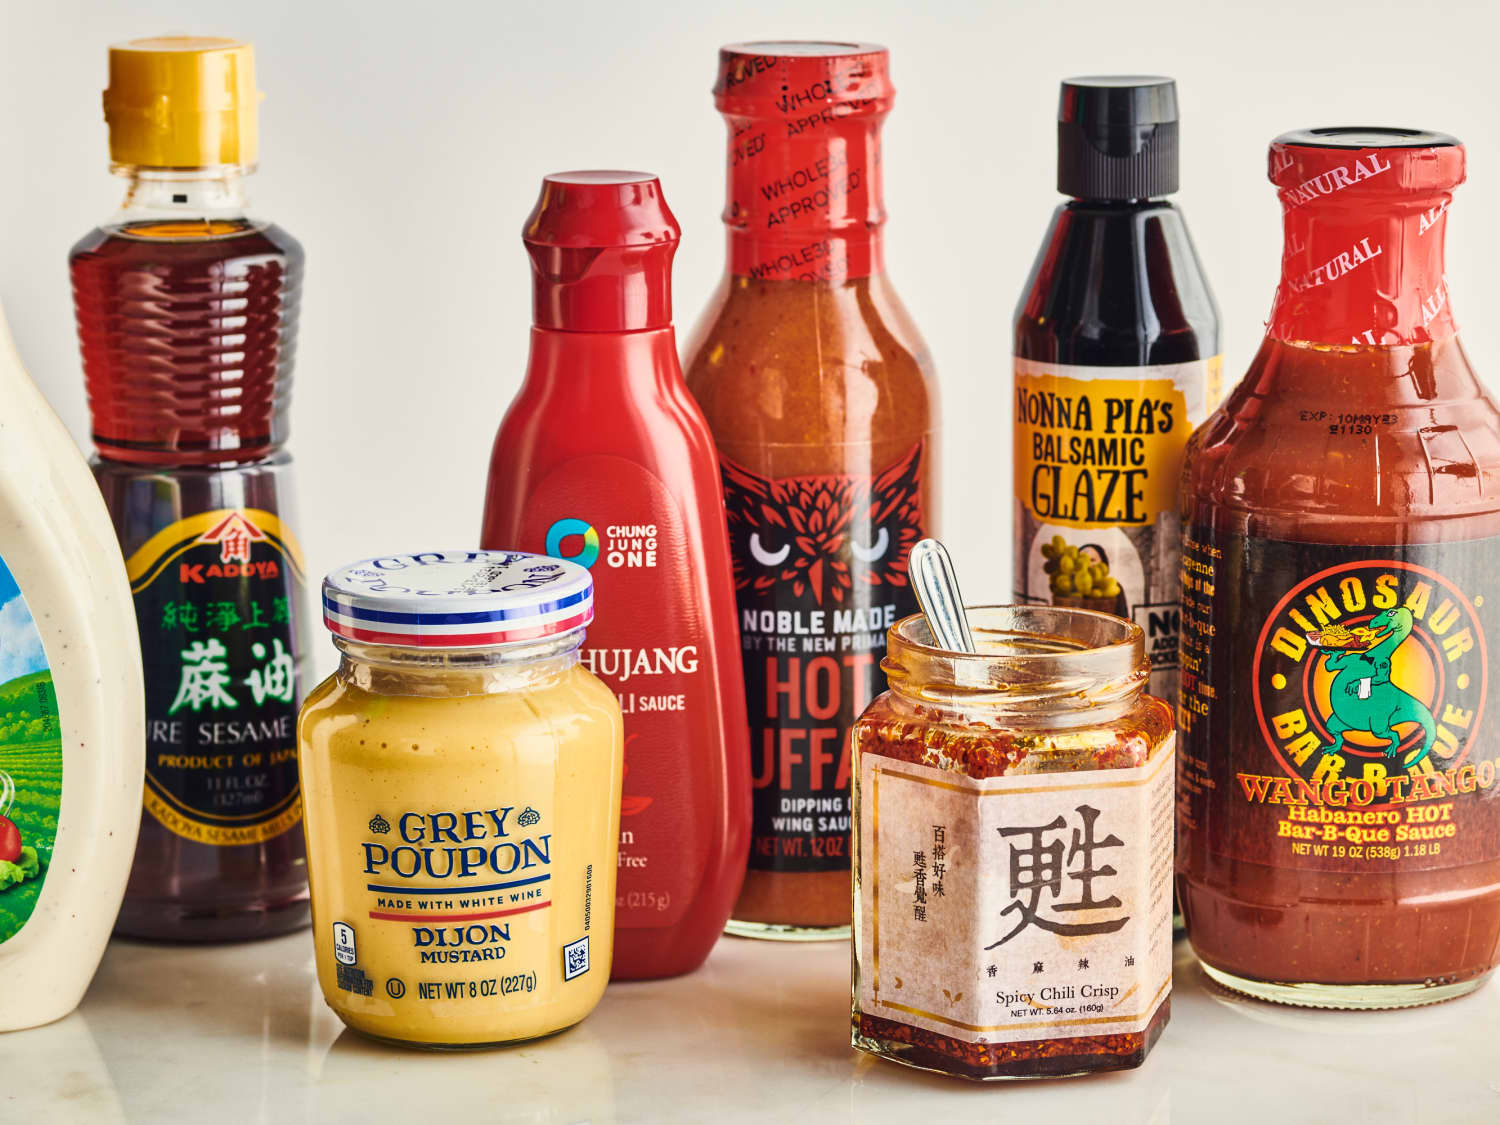 11 Plant-Based Whole30 Sauces and Condiments